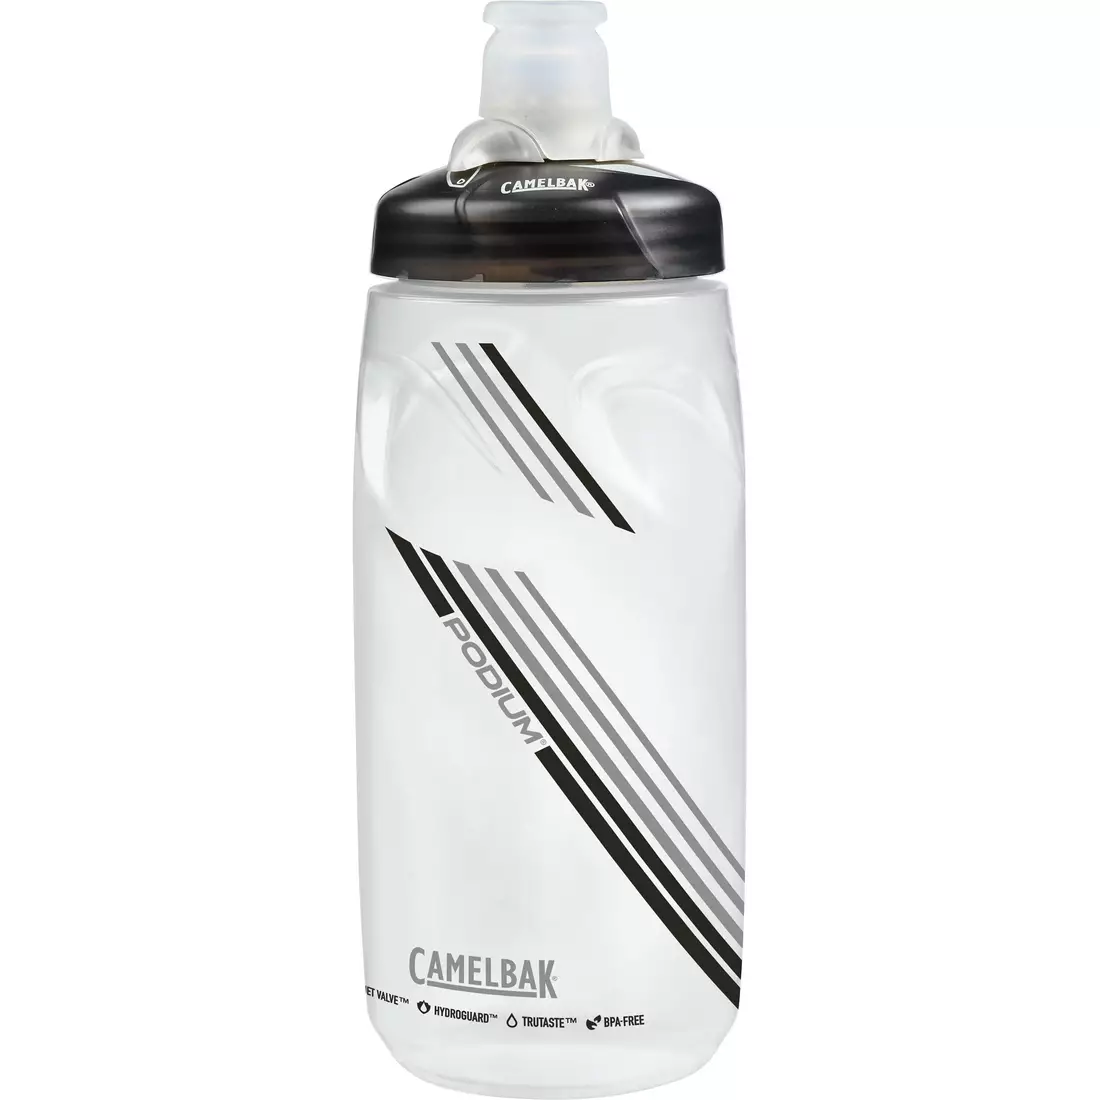 Camelbak SS18 Podium bicycle water bottle 21oz / 620 ml Clear Carbon